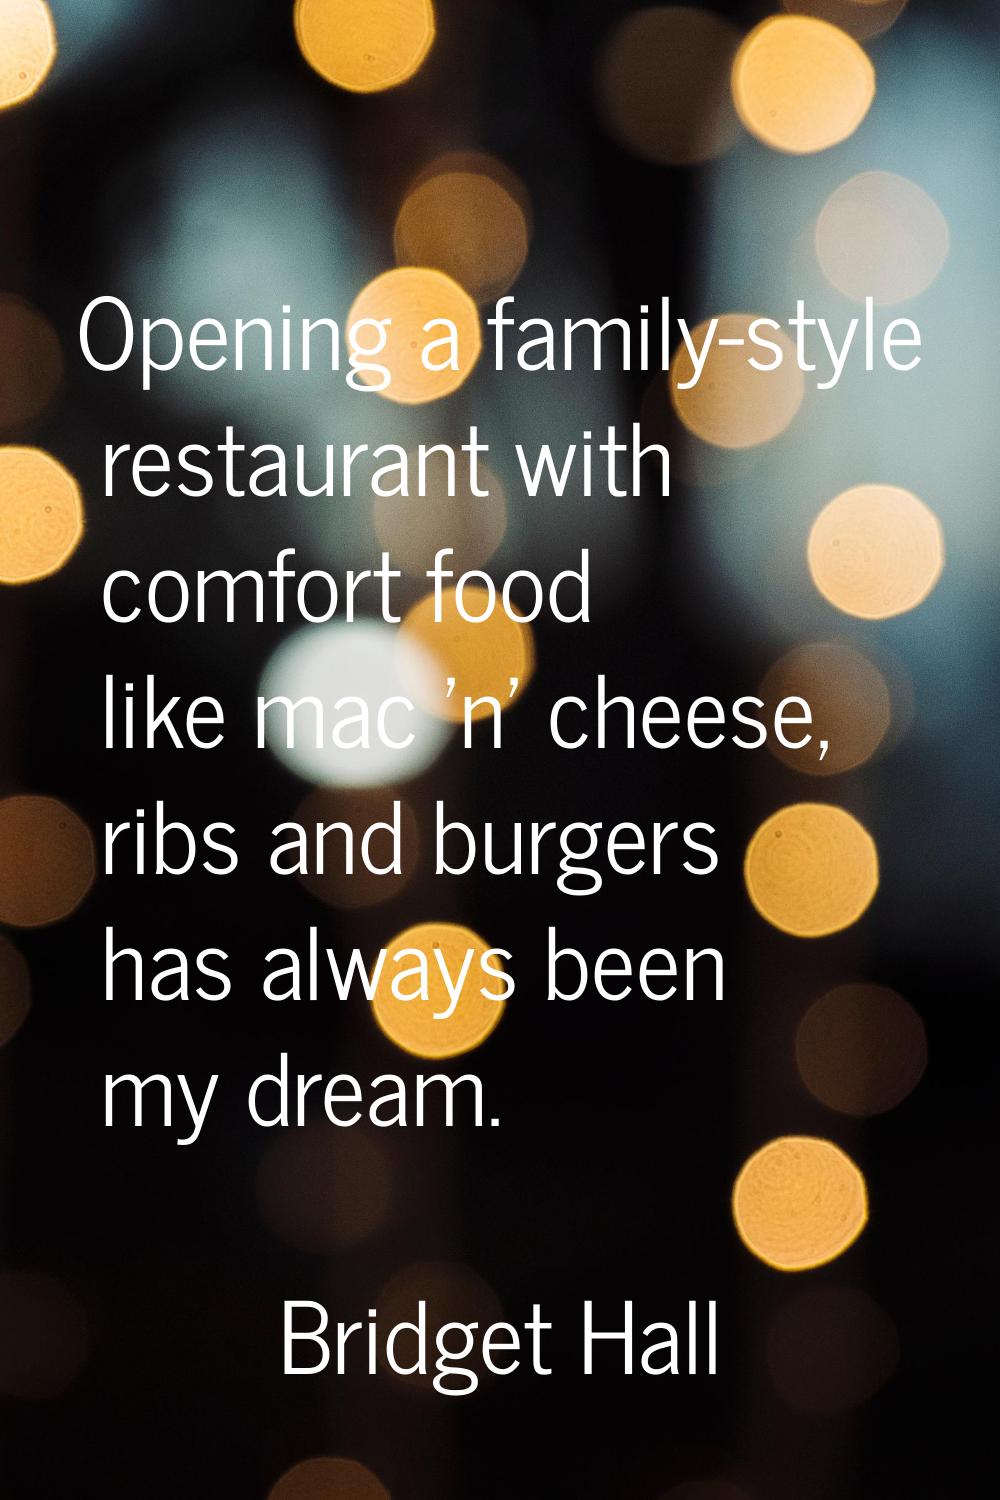 Opening a family-style restaurant with comfort food like mac 'n' cheese, ribs and burgers has alway